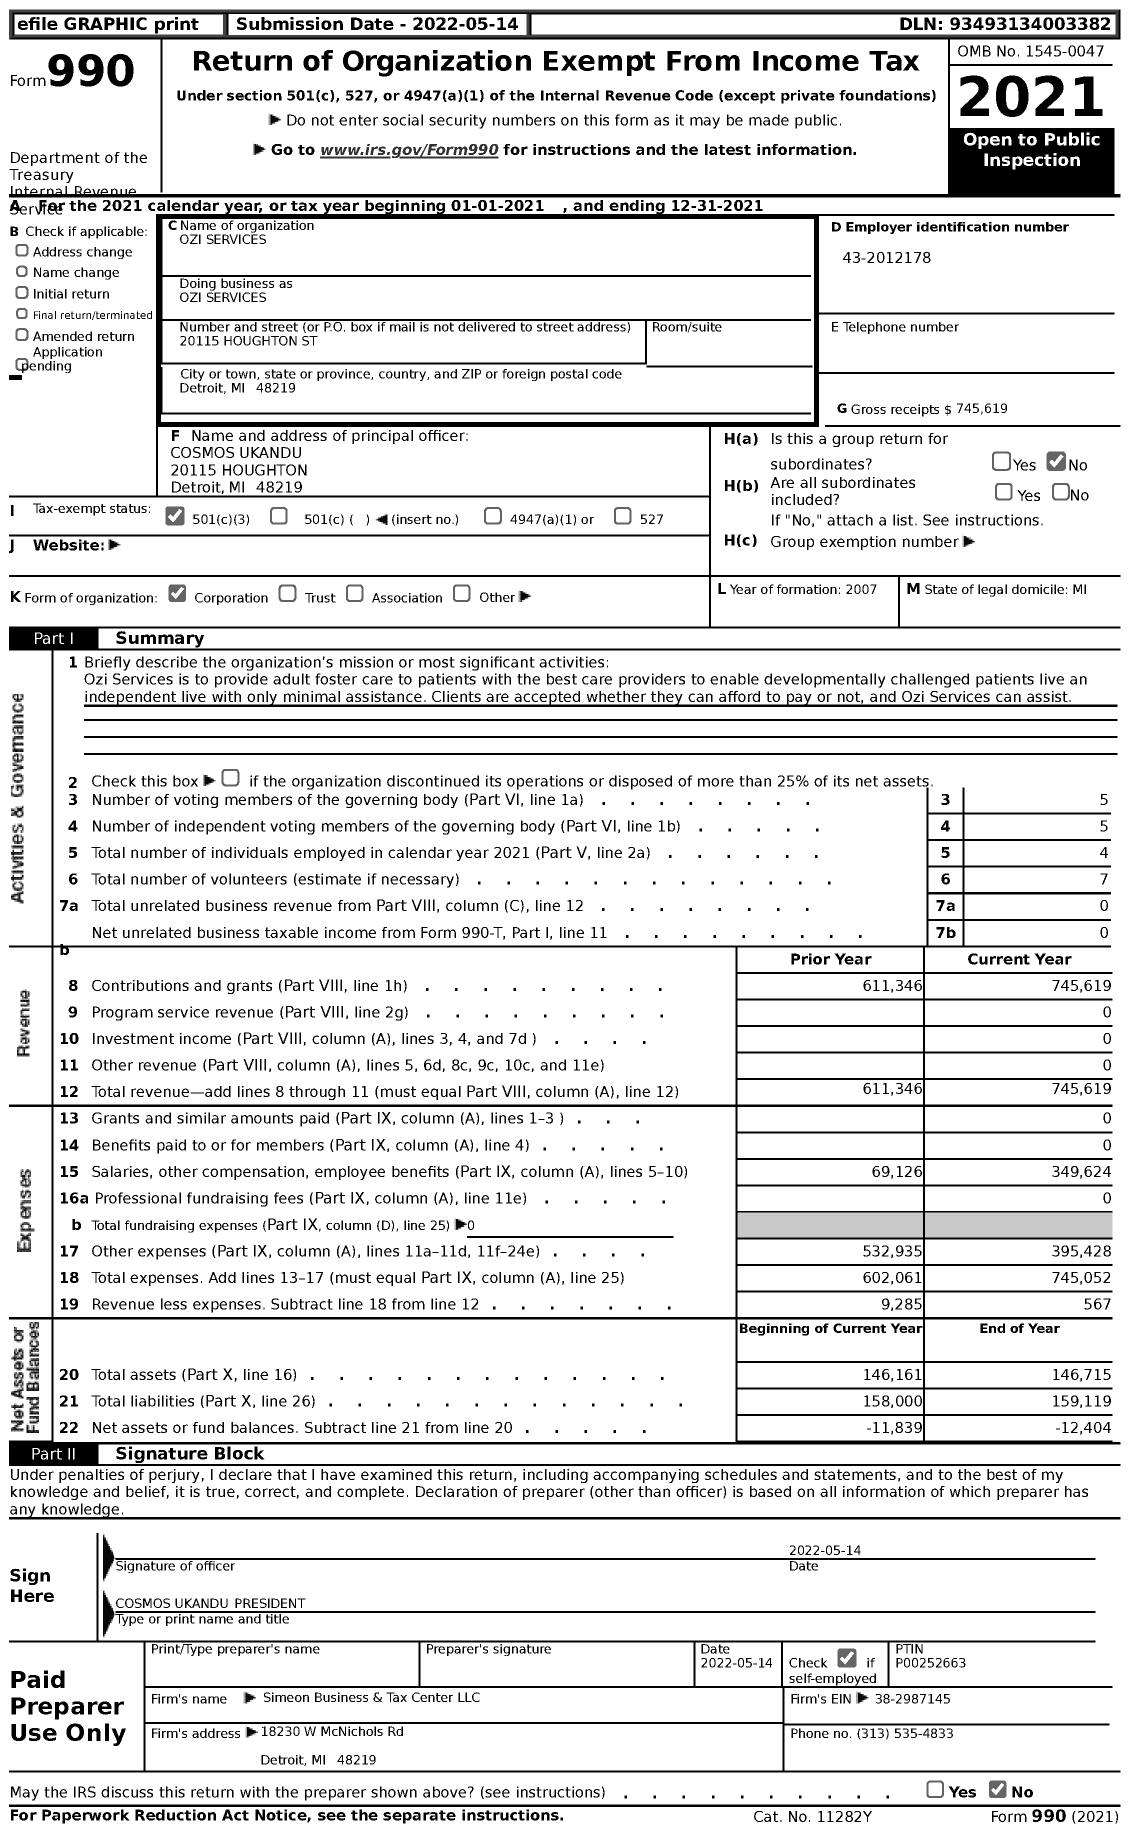 Image of first page of 2021 Form 990 for Ozi Services (OSI)